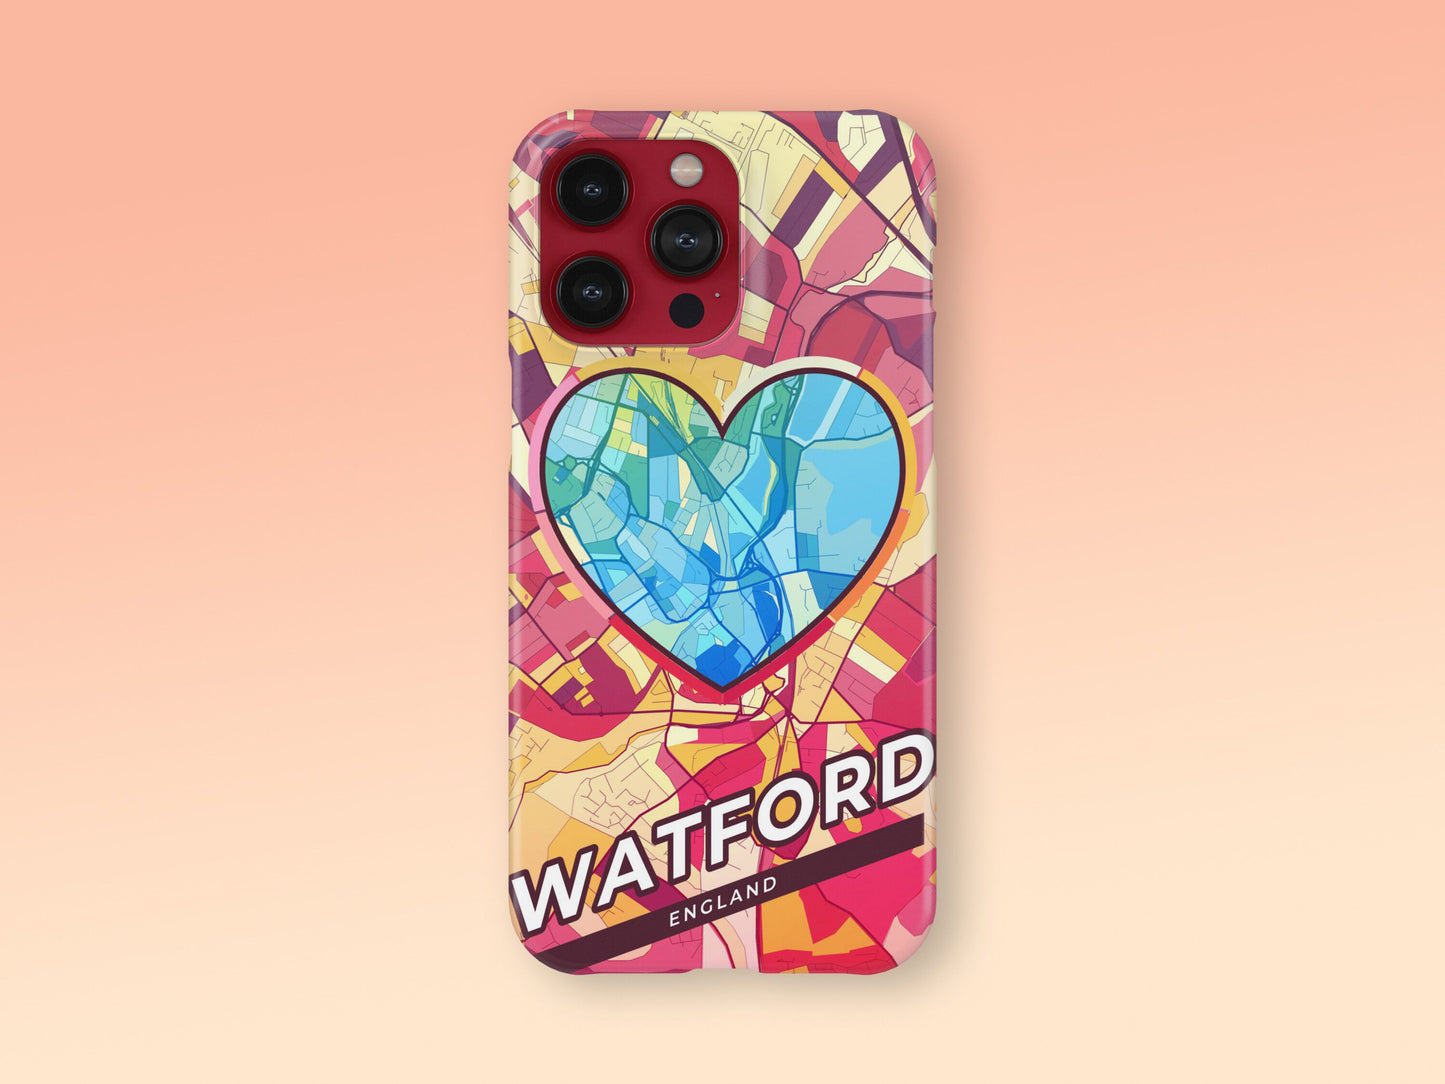 Watford England slim phone case with colorful icon 2